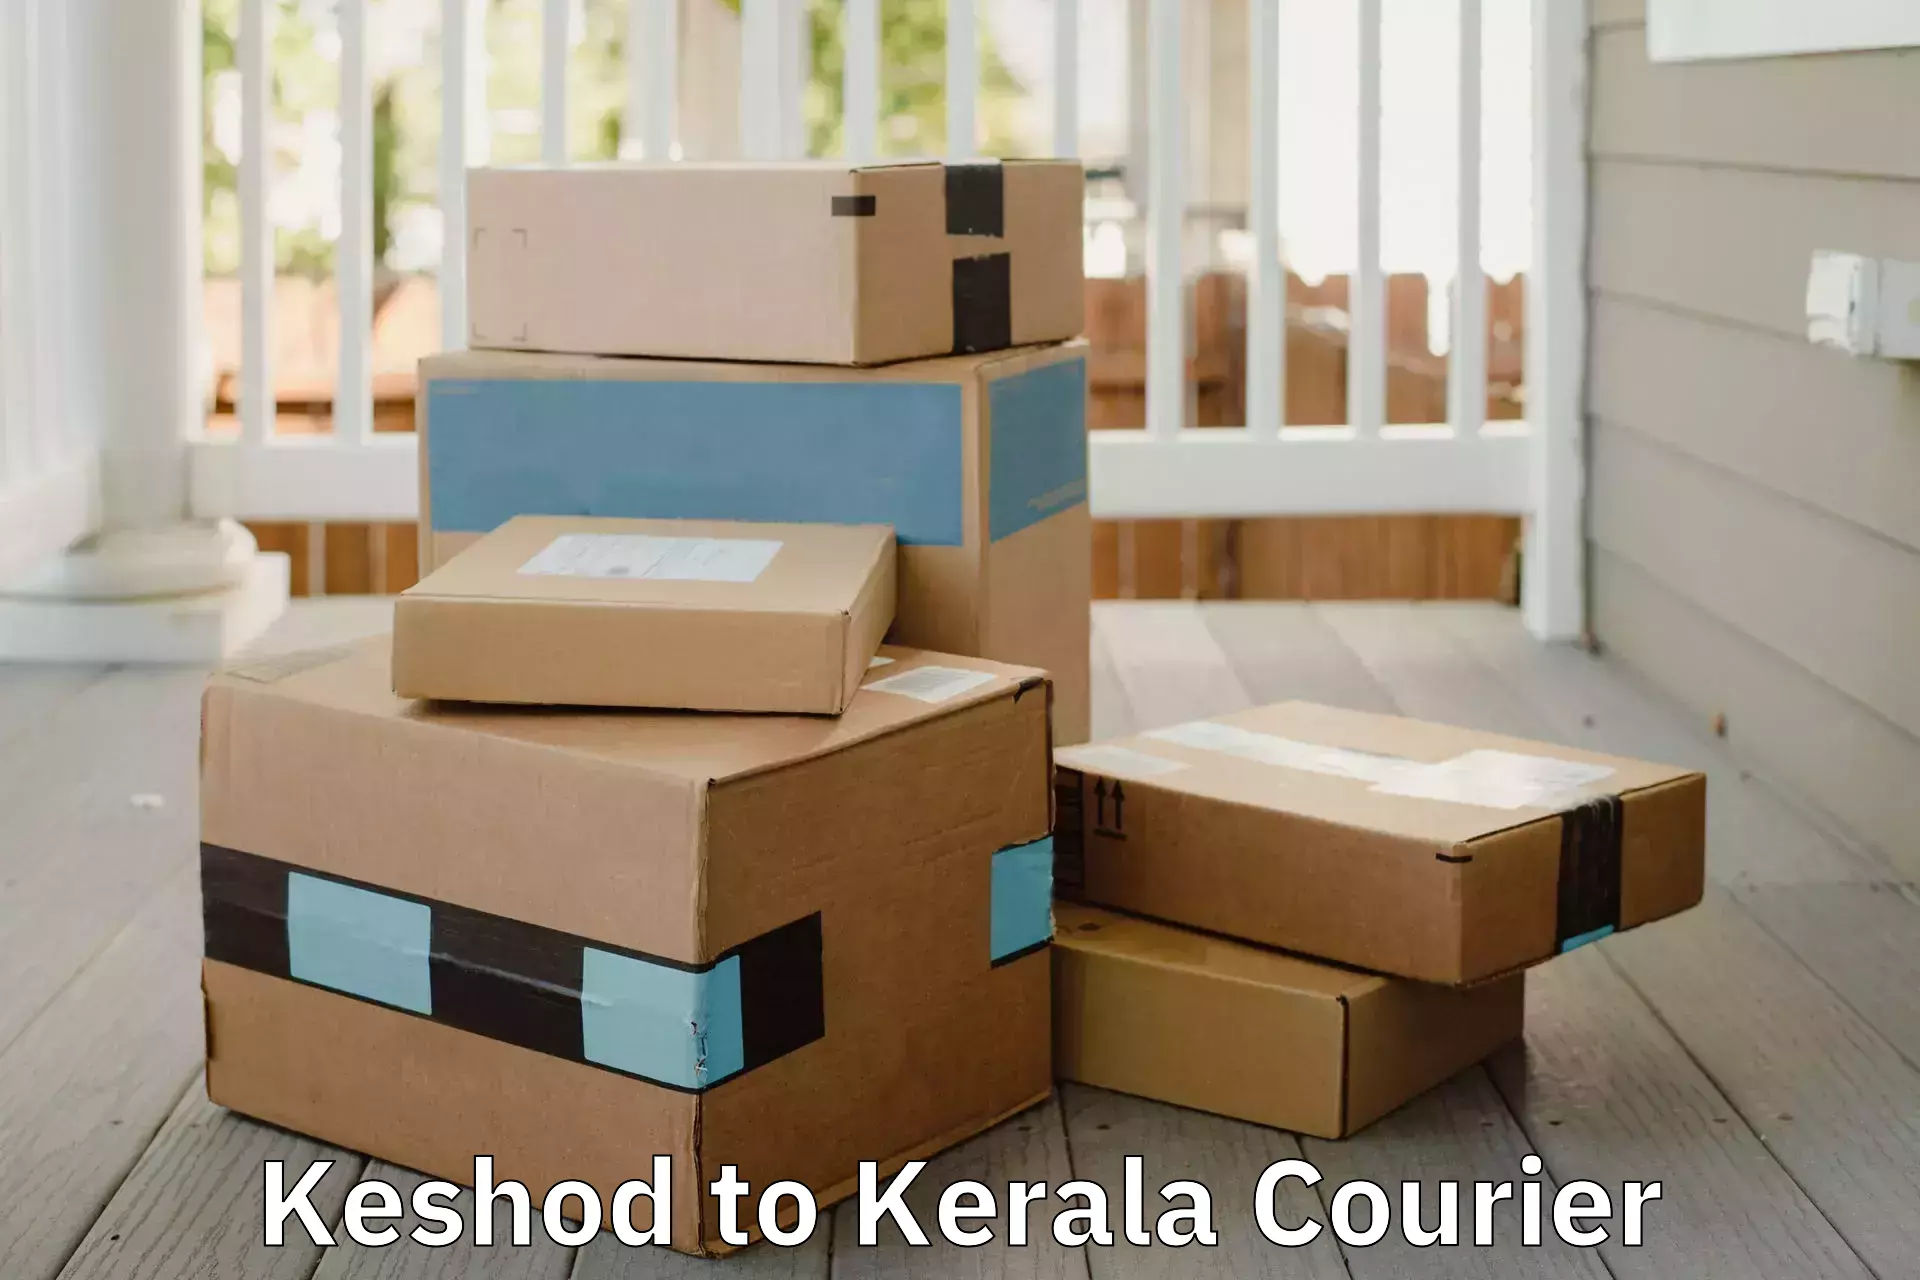 Trusted relocation experts Keshod to Kerala